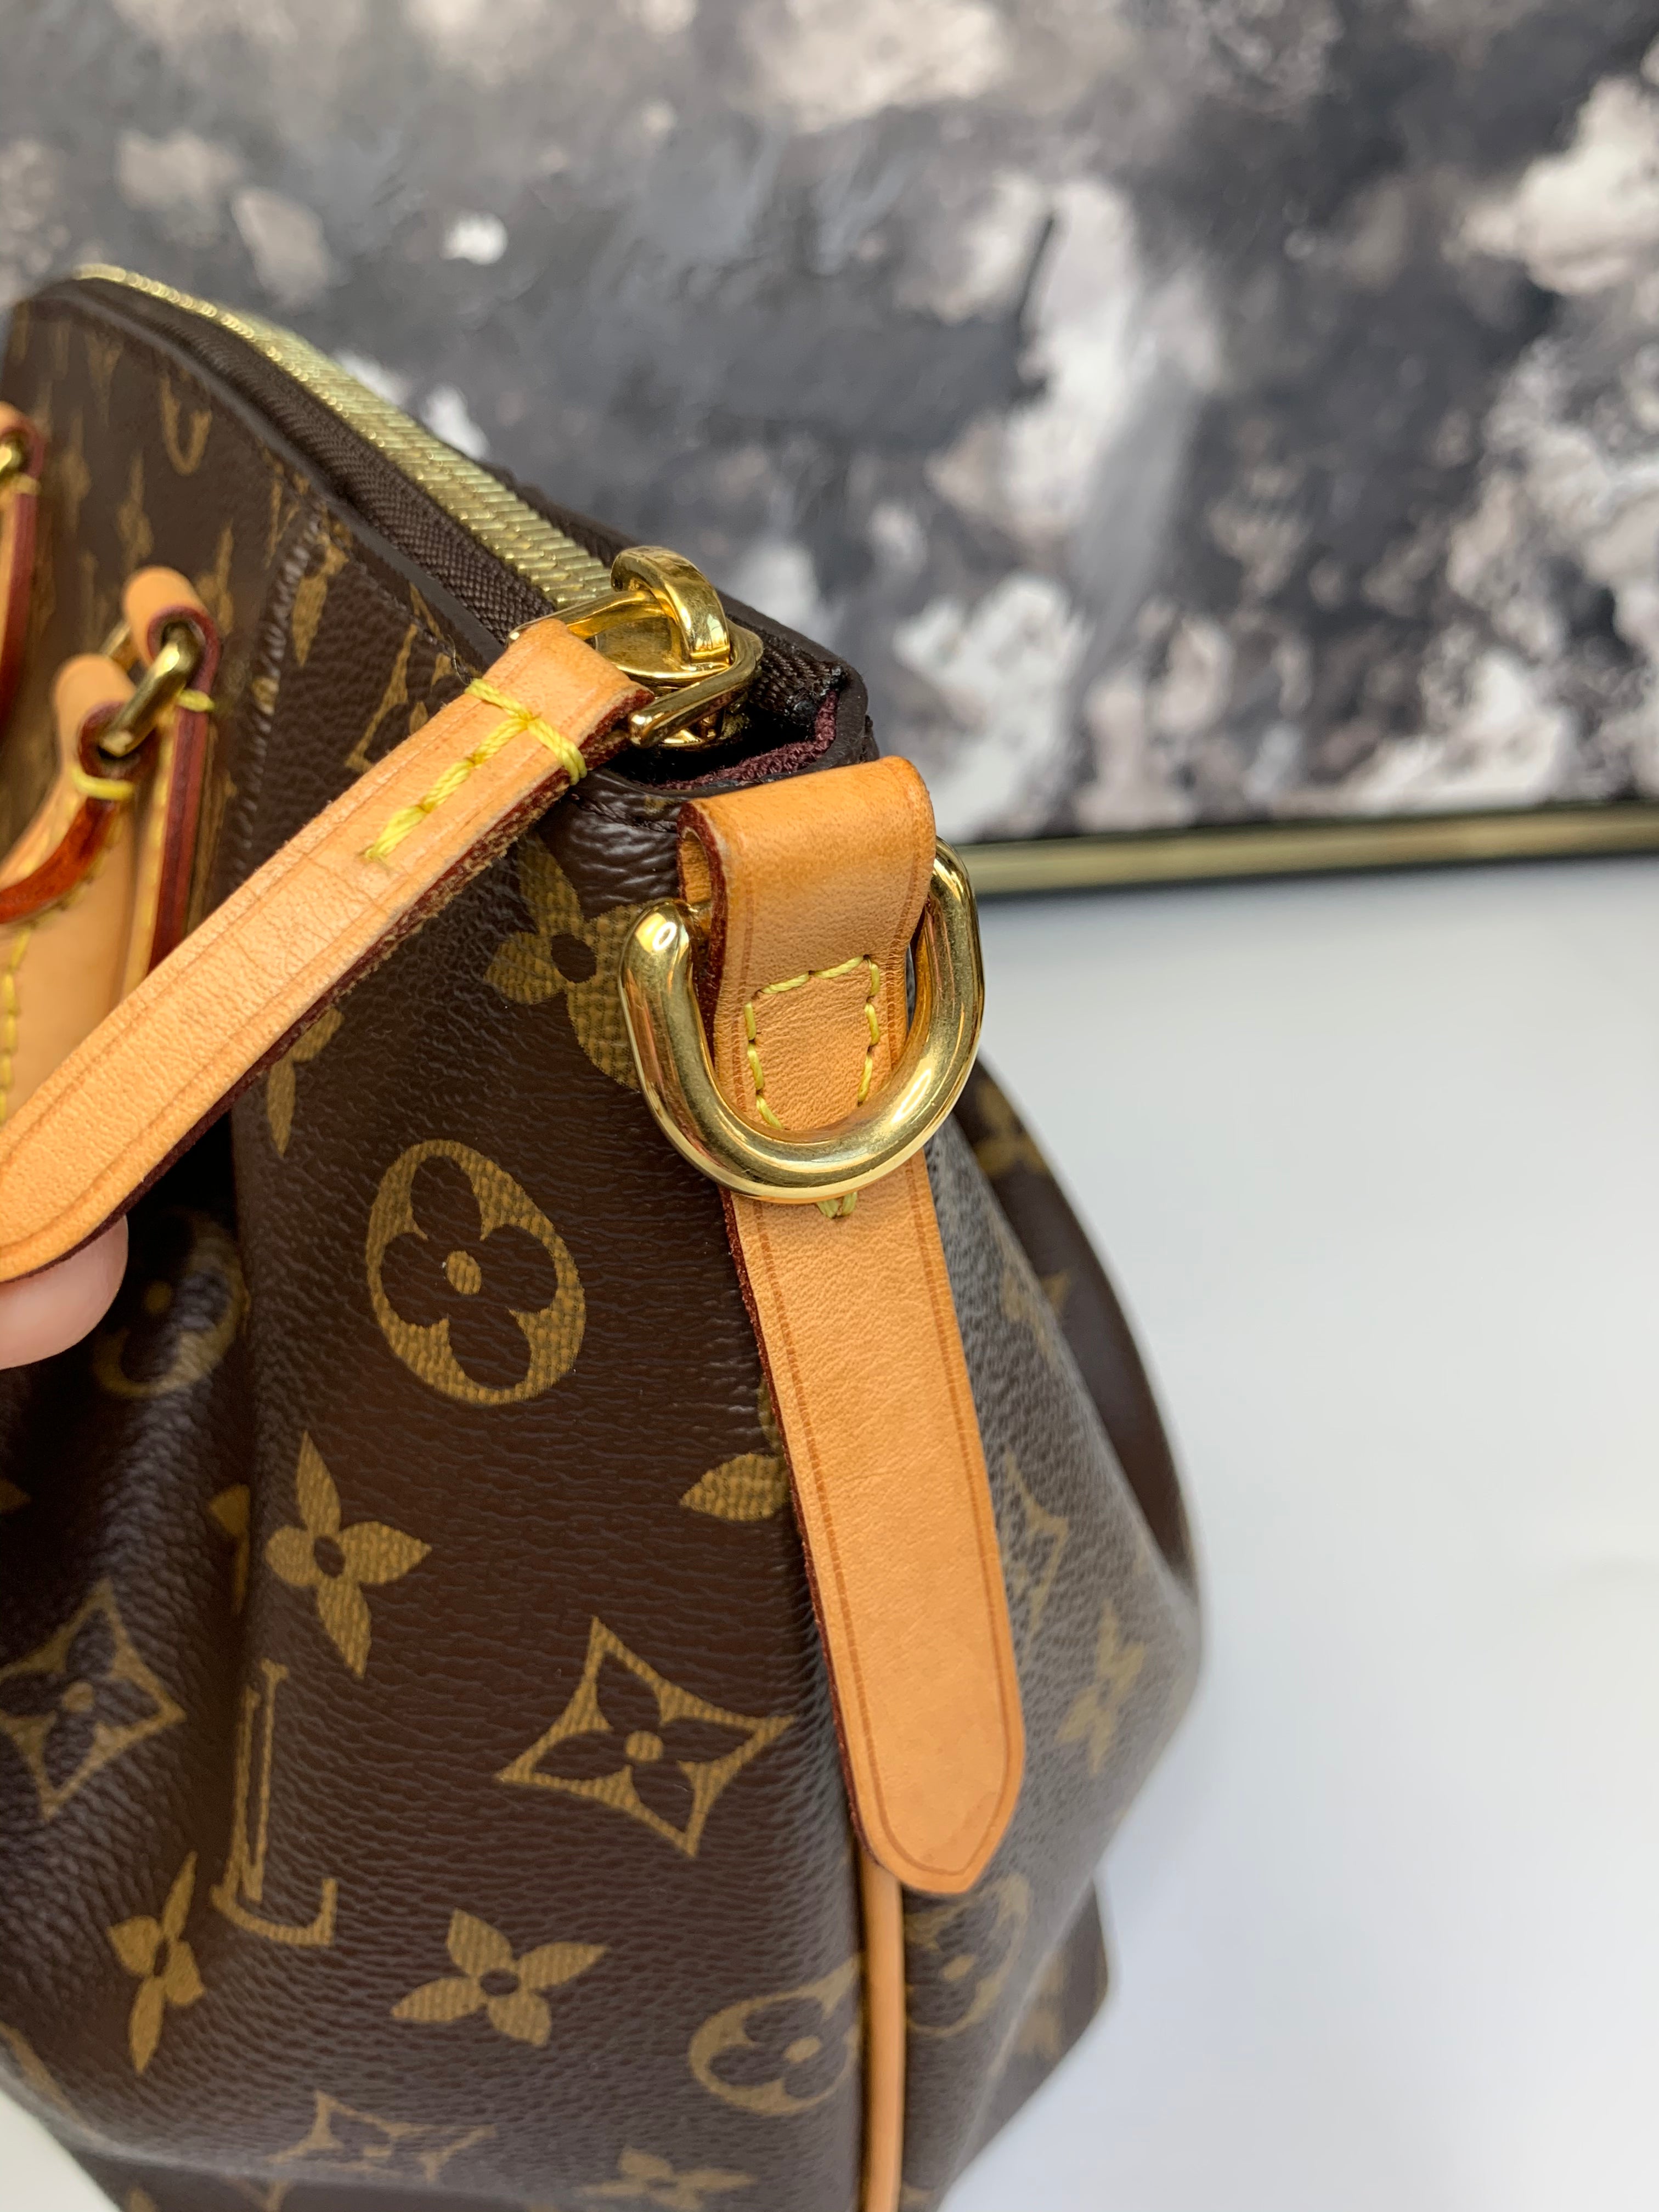 Louis Vuitton Tivoli PM bag in like new condition! Multiple colors